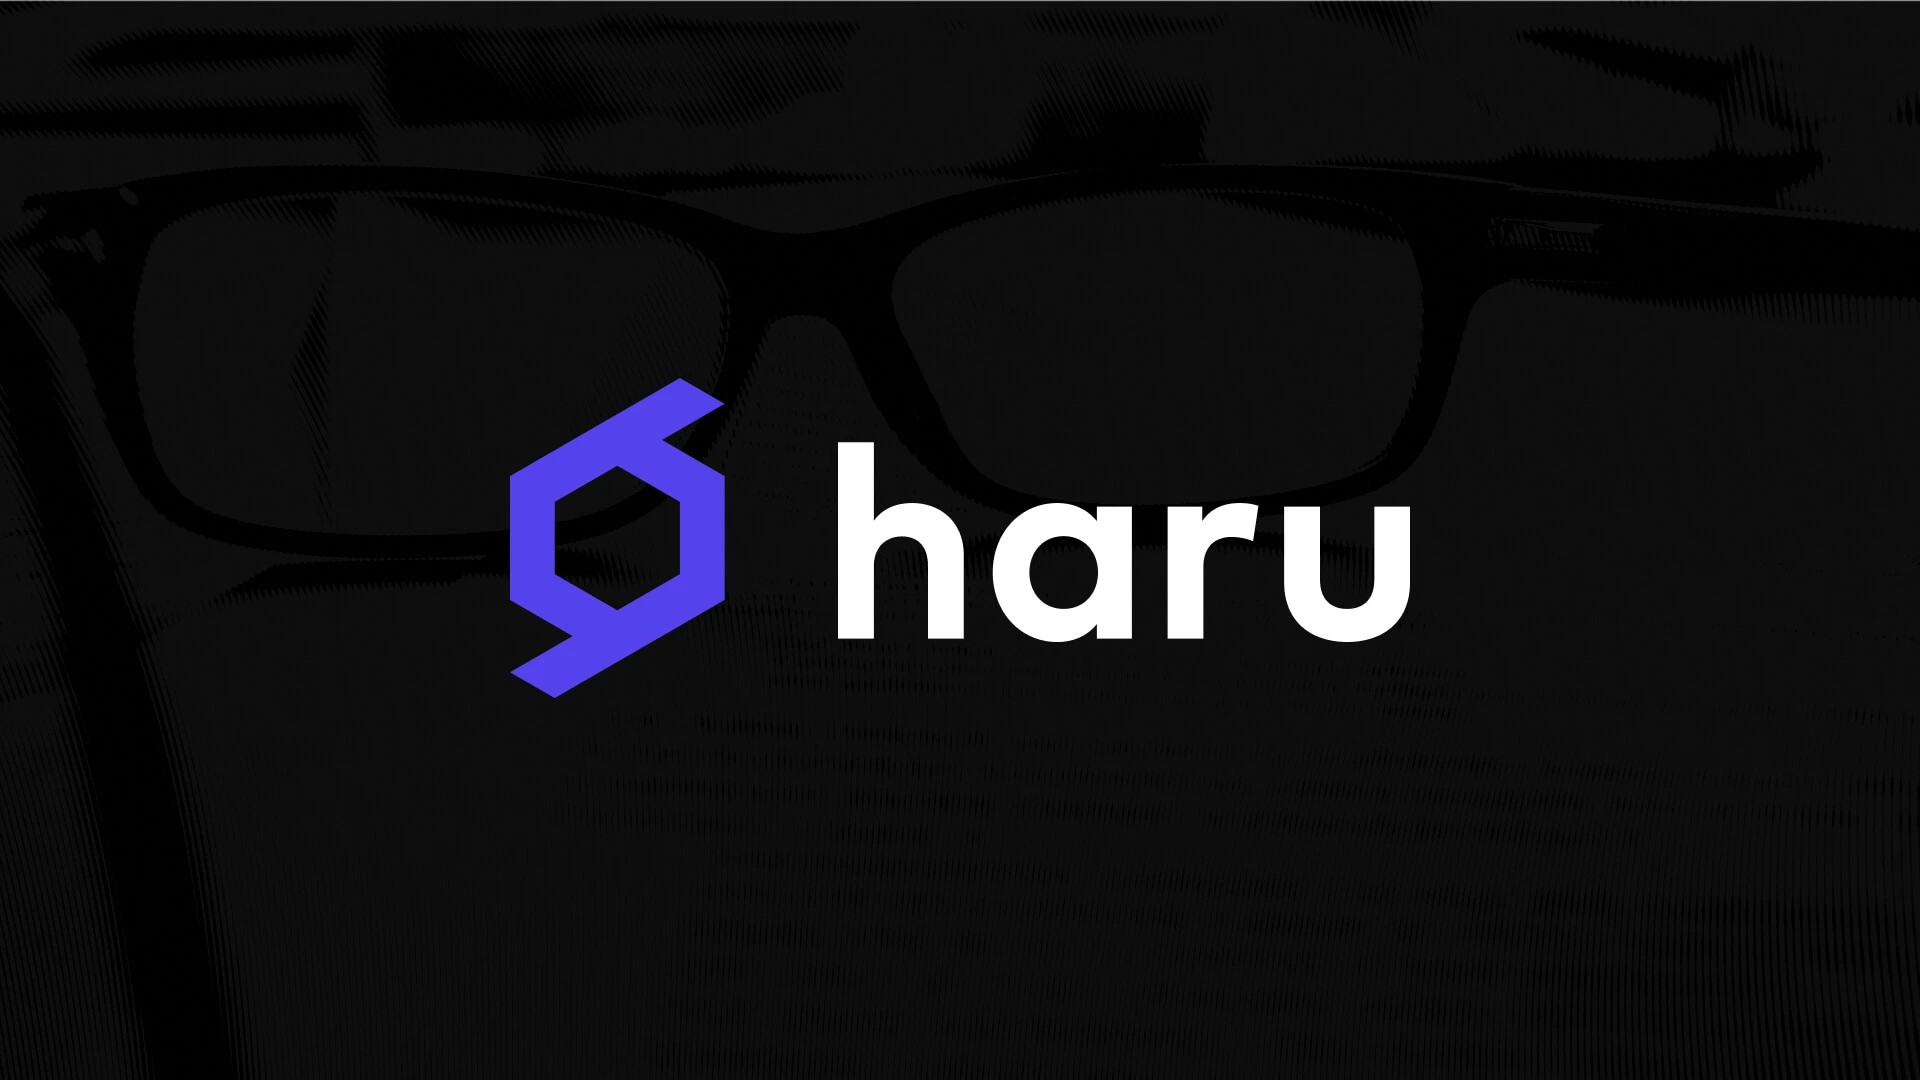 Logo of Haru Invest in purple and white with black background